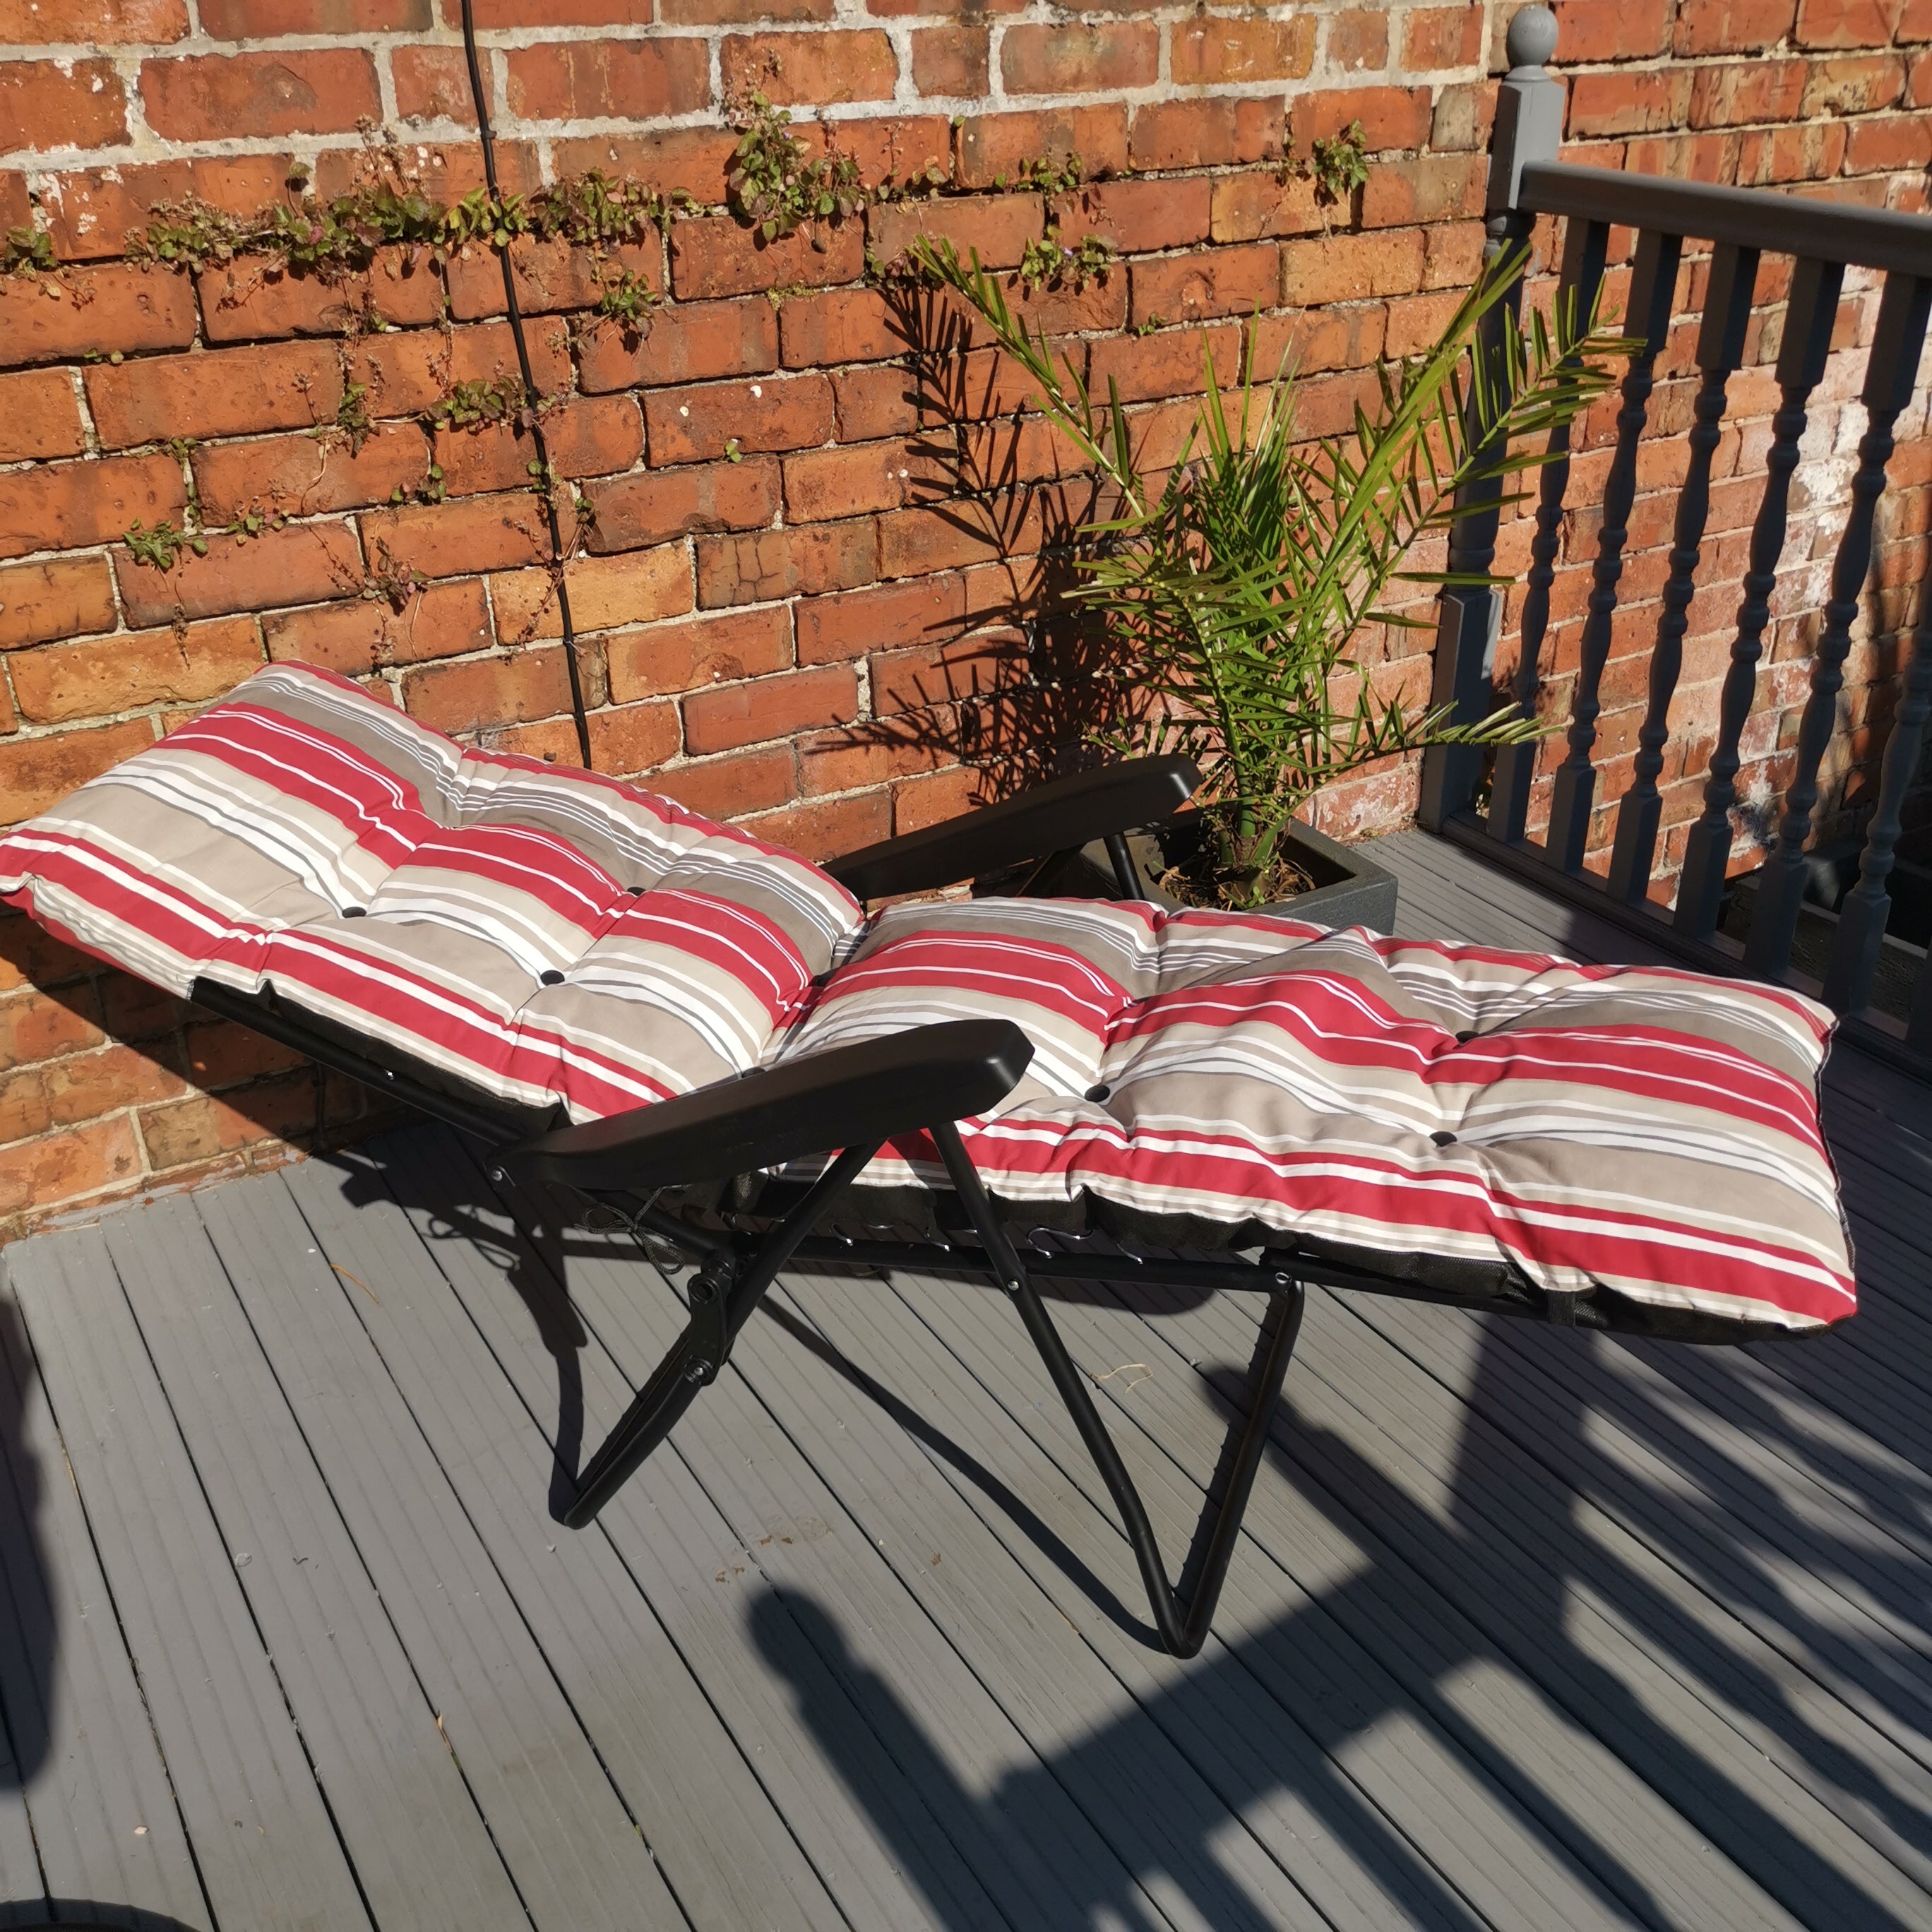 Padded Outdoor Garden Patio Recliner / Sun Lounger with Red Stripes